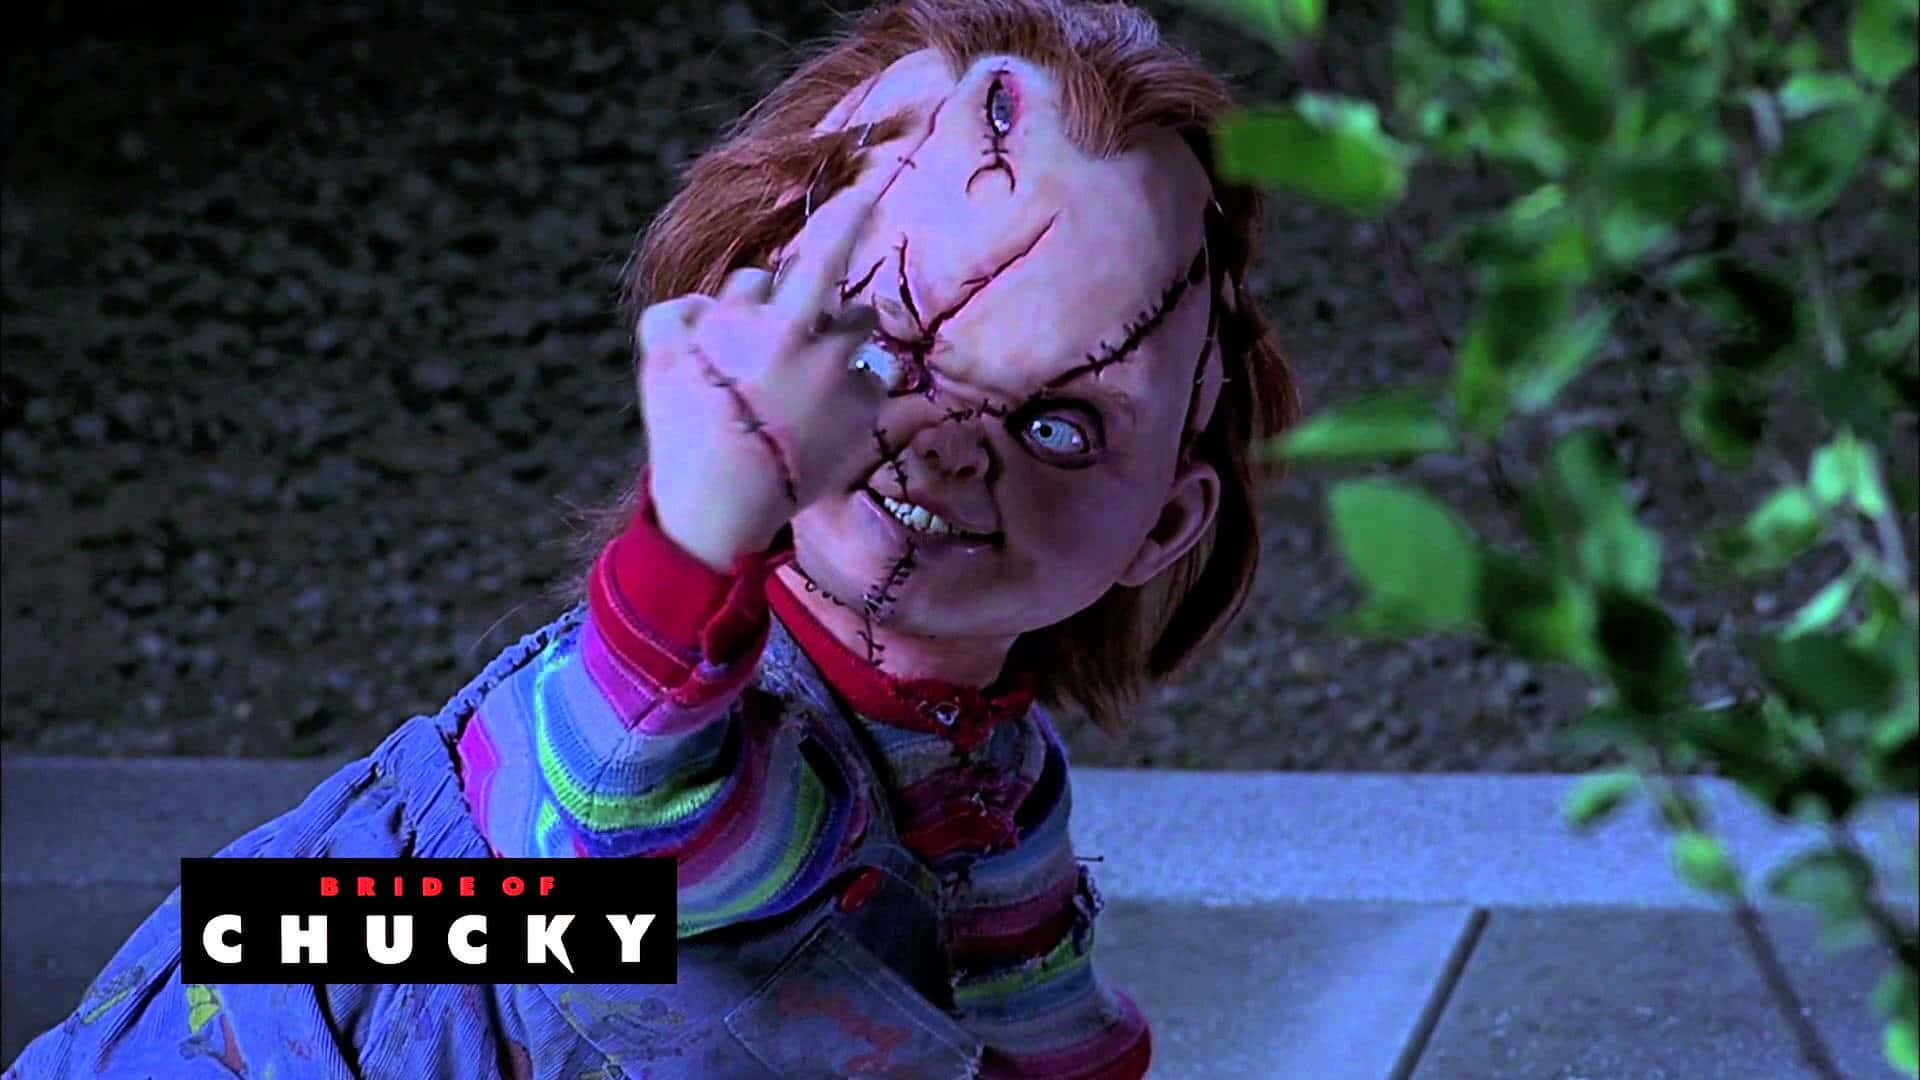 Chucky Doll is Ready to Strike Fear into Your Heart Wallpaper